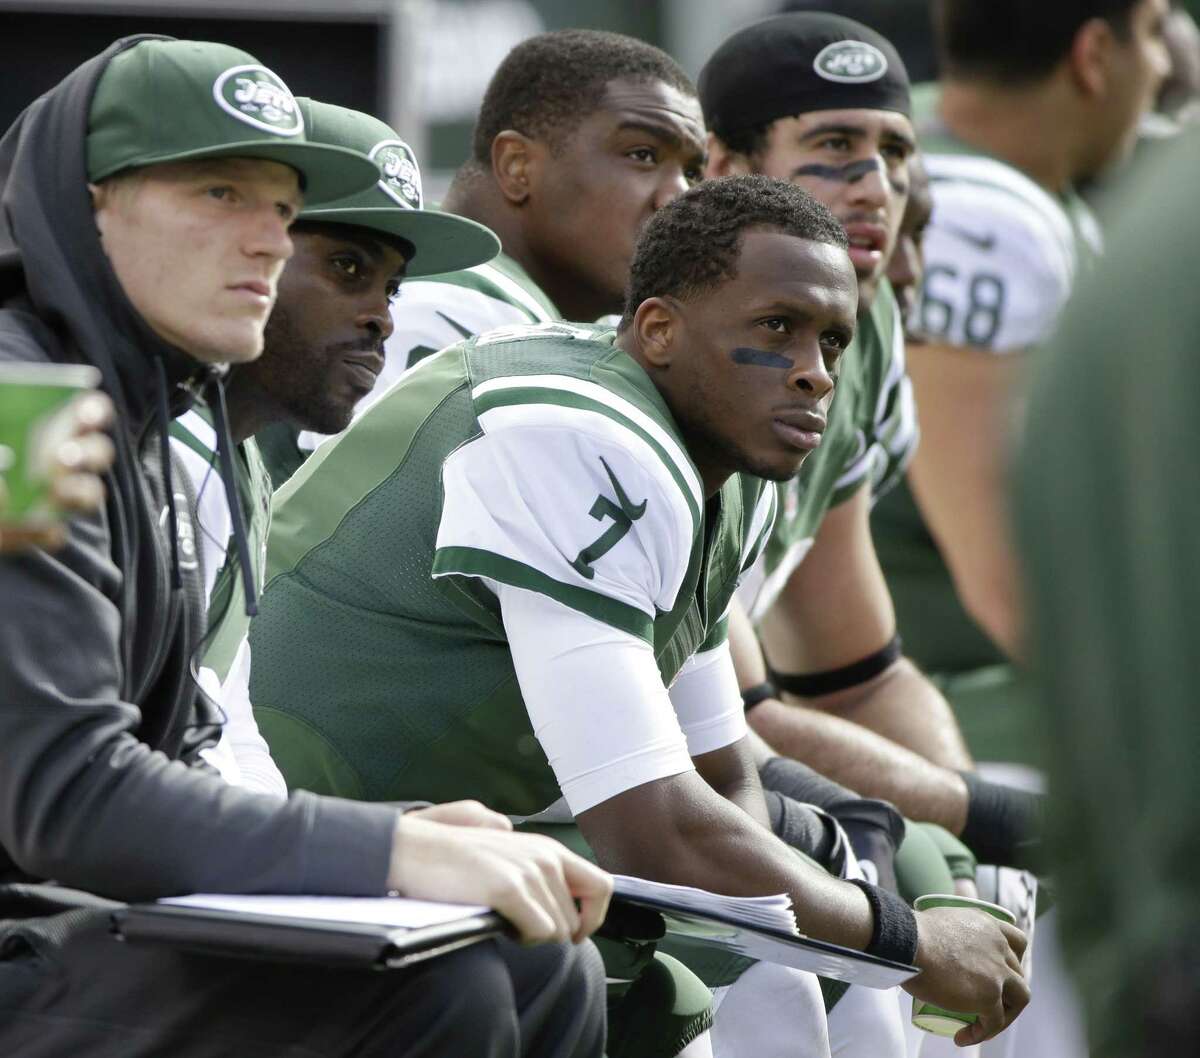 Jets quarterback Geno Smith (7) sits next to Michael Vick (1) during the first half of Sunday’s game against the Bills.